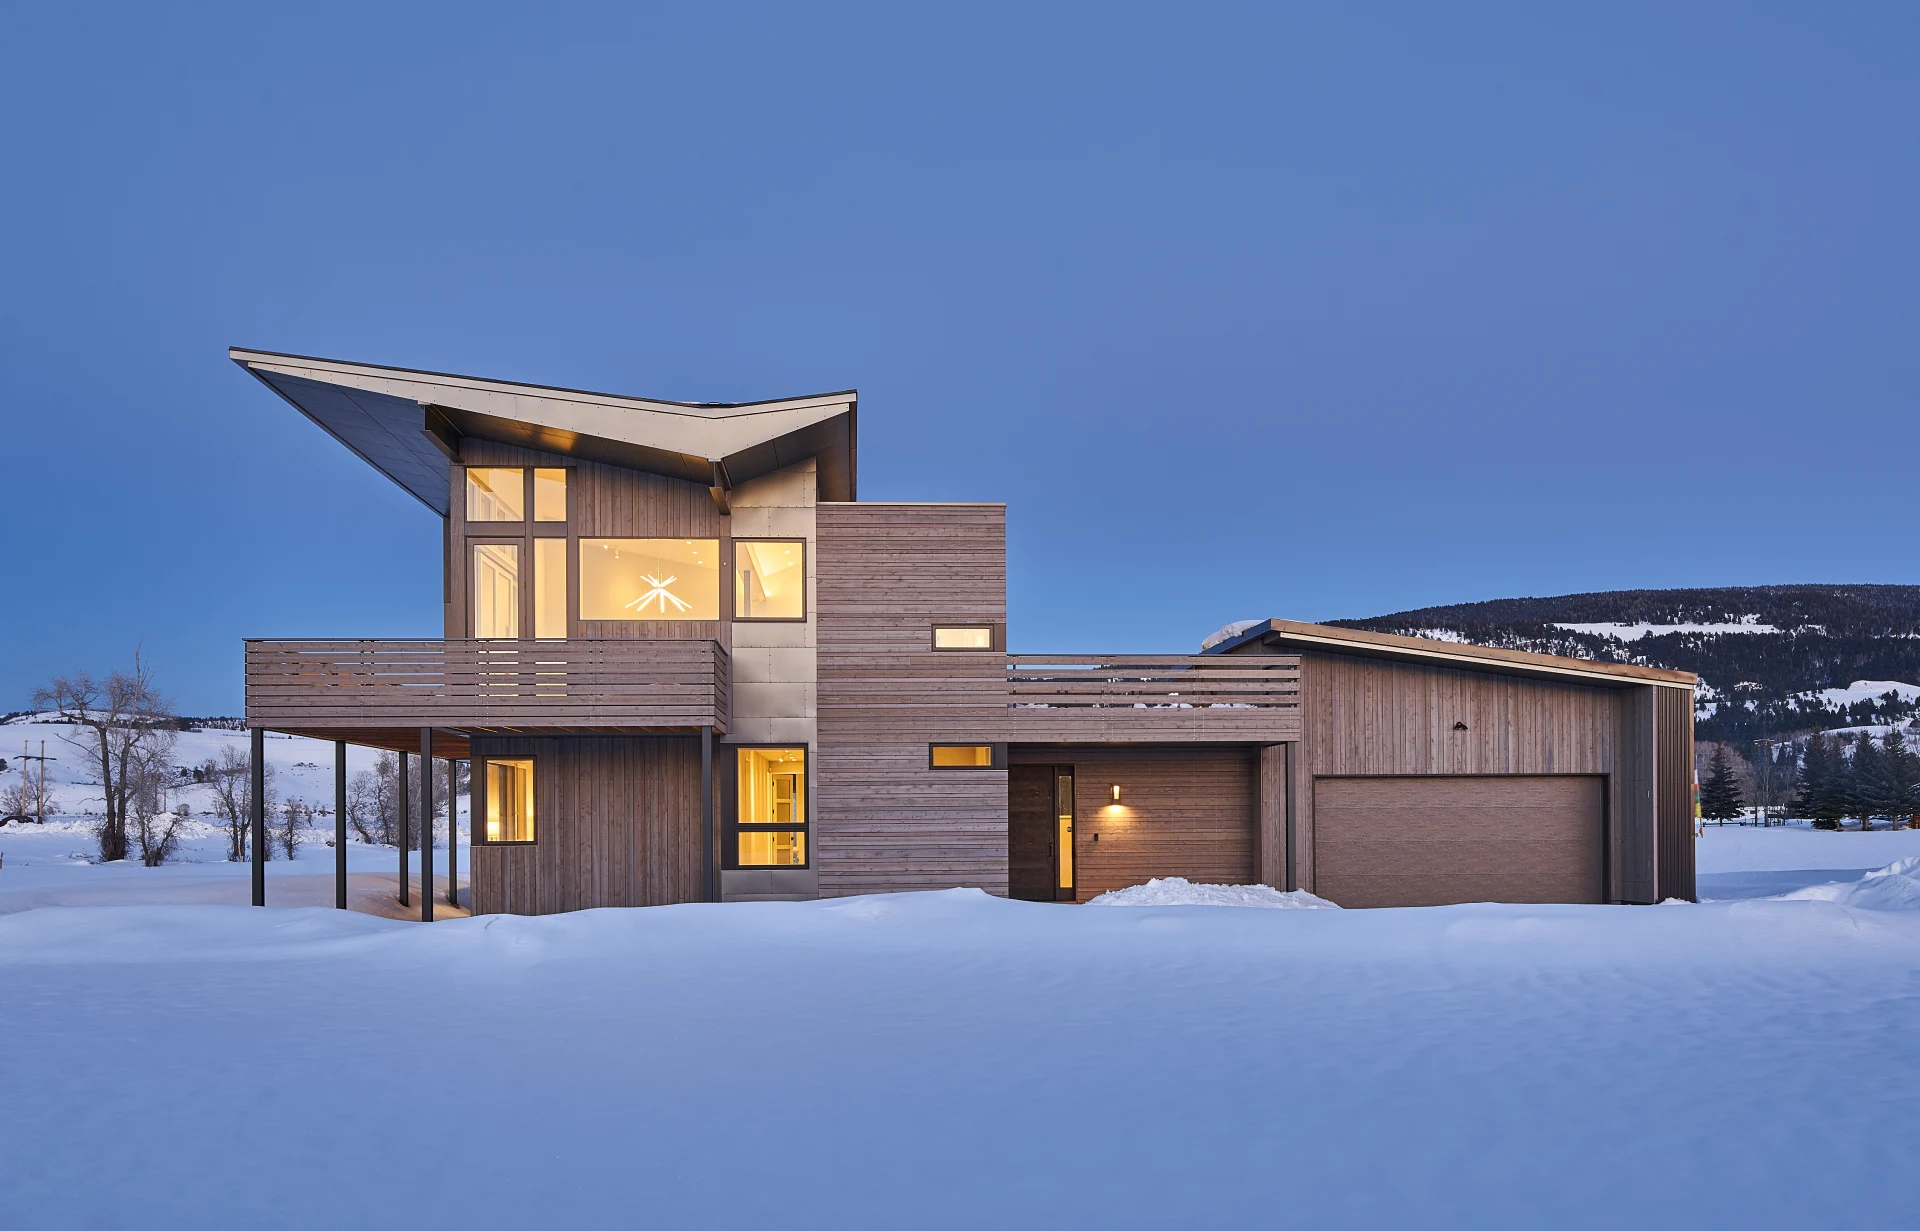 Full property view of Antelope Flats, a custom home designed and built by Farmer Payne Architects.